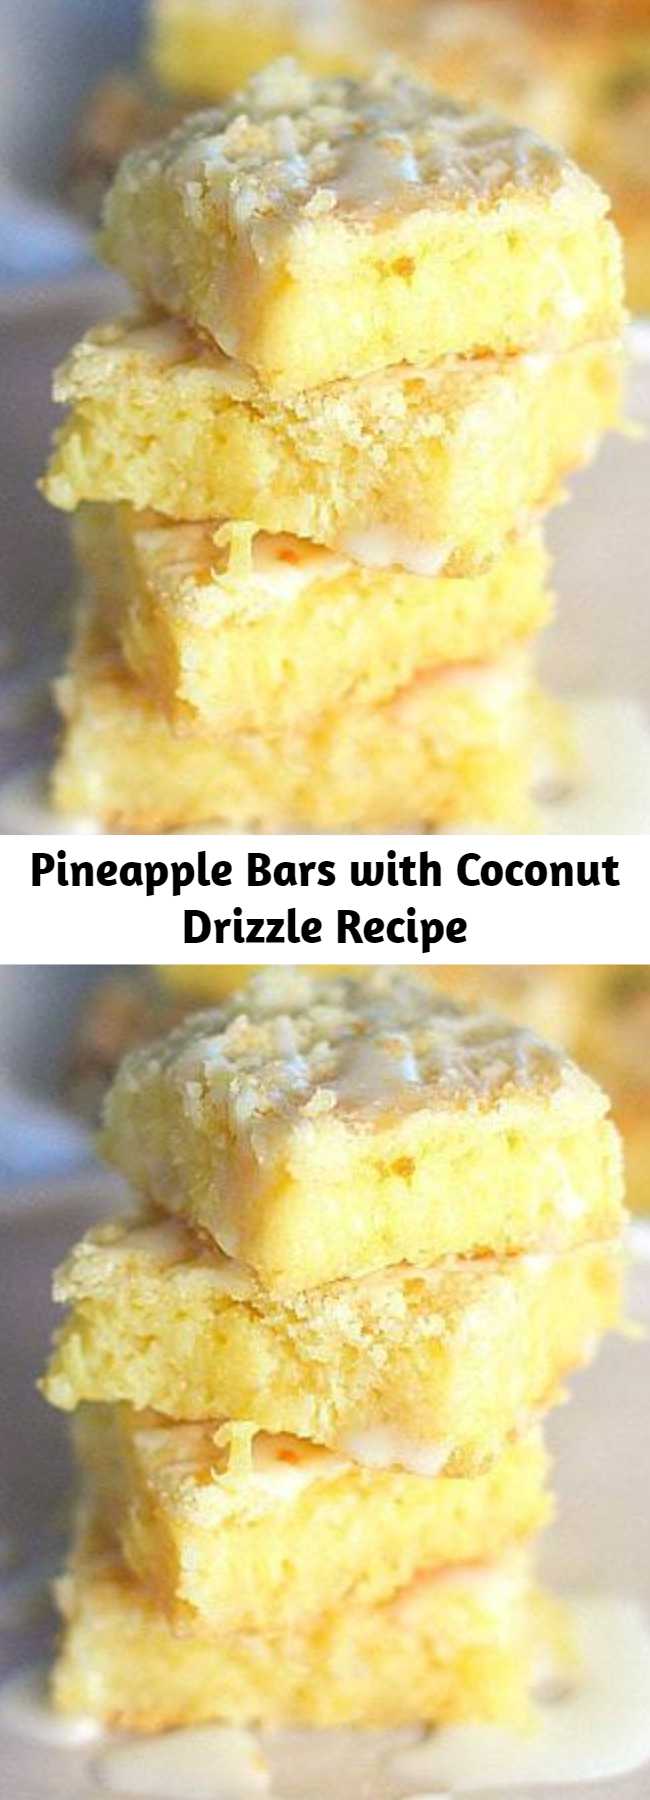 Pineapple Bars with Coconut Drizzle Recipe - Only a few ingredients and super easy to make. I topped with optional Coconut Drizzle...they are good with or without!